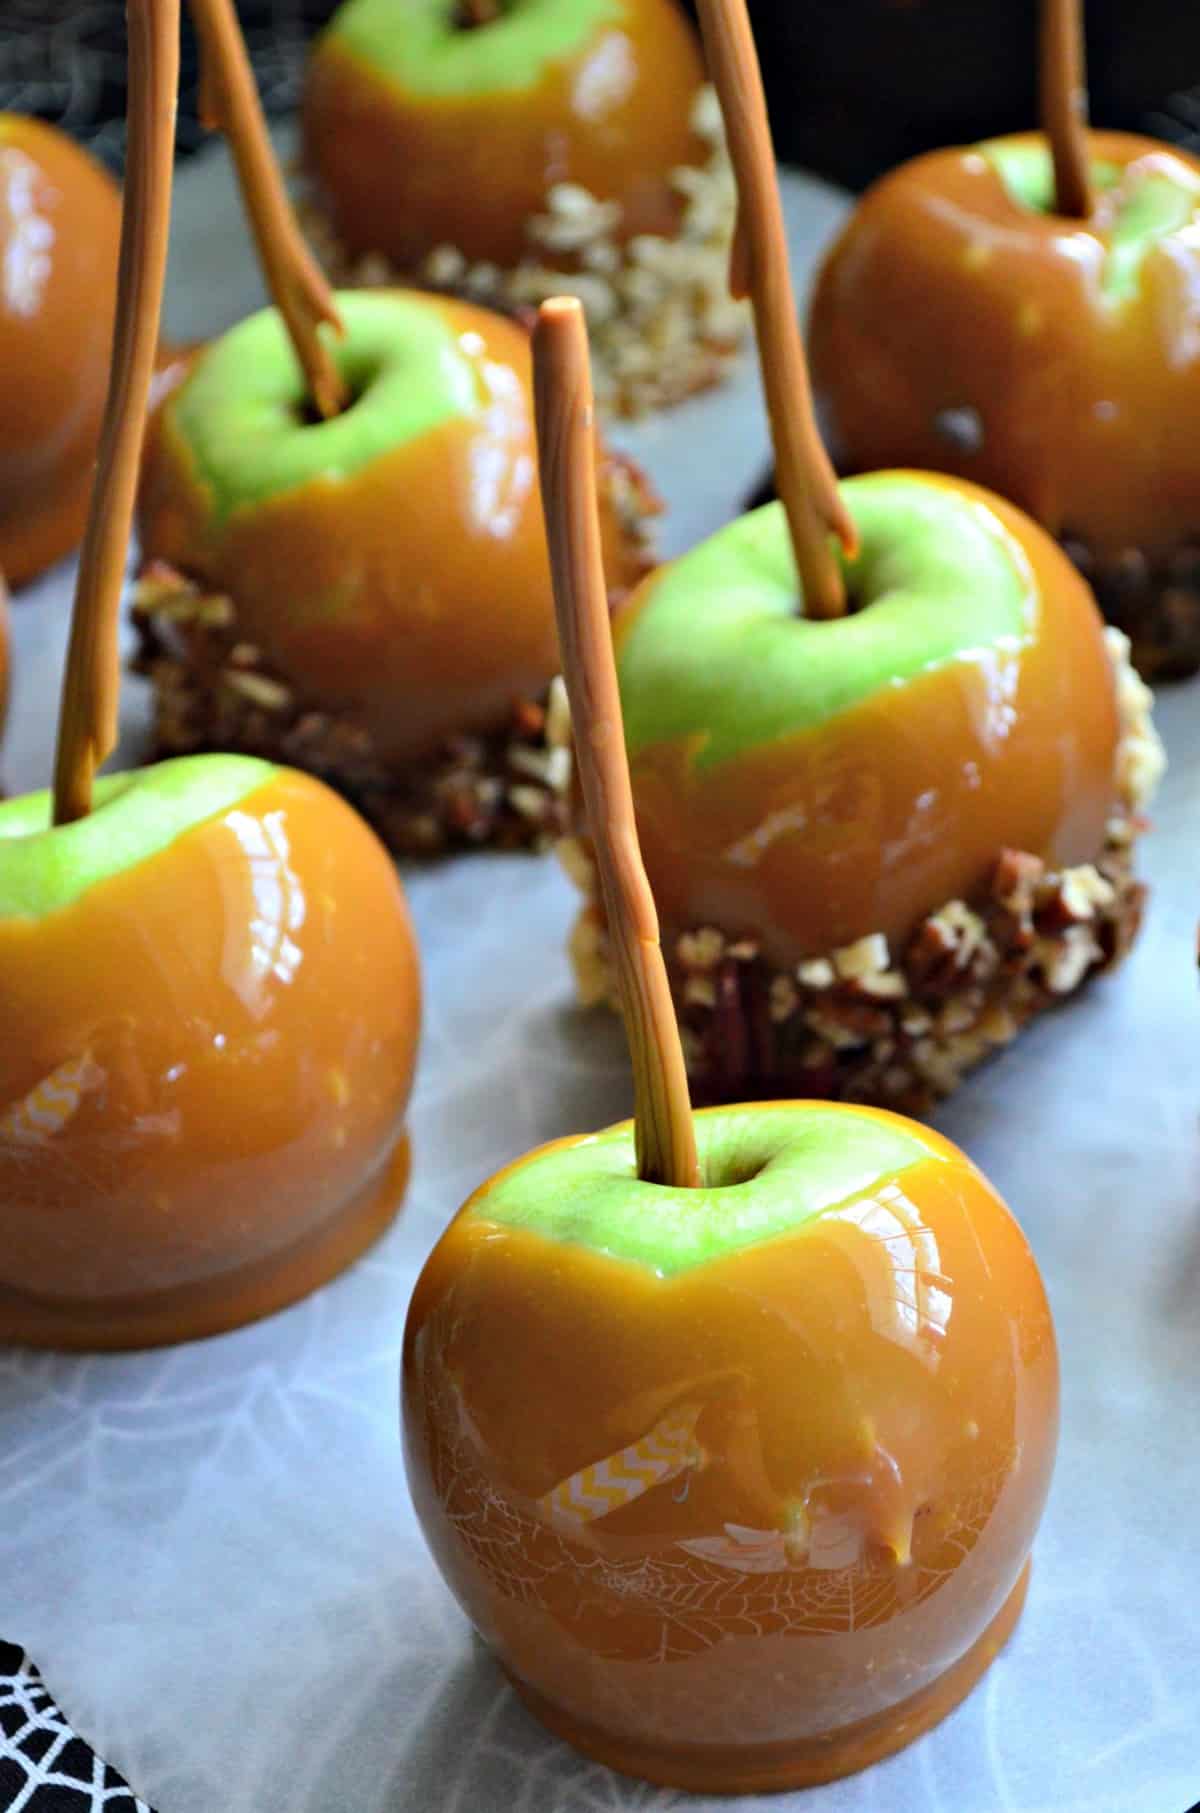 close up of green apples dipped in caramel, some with nuts.